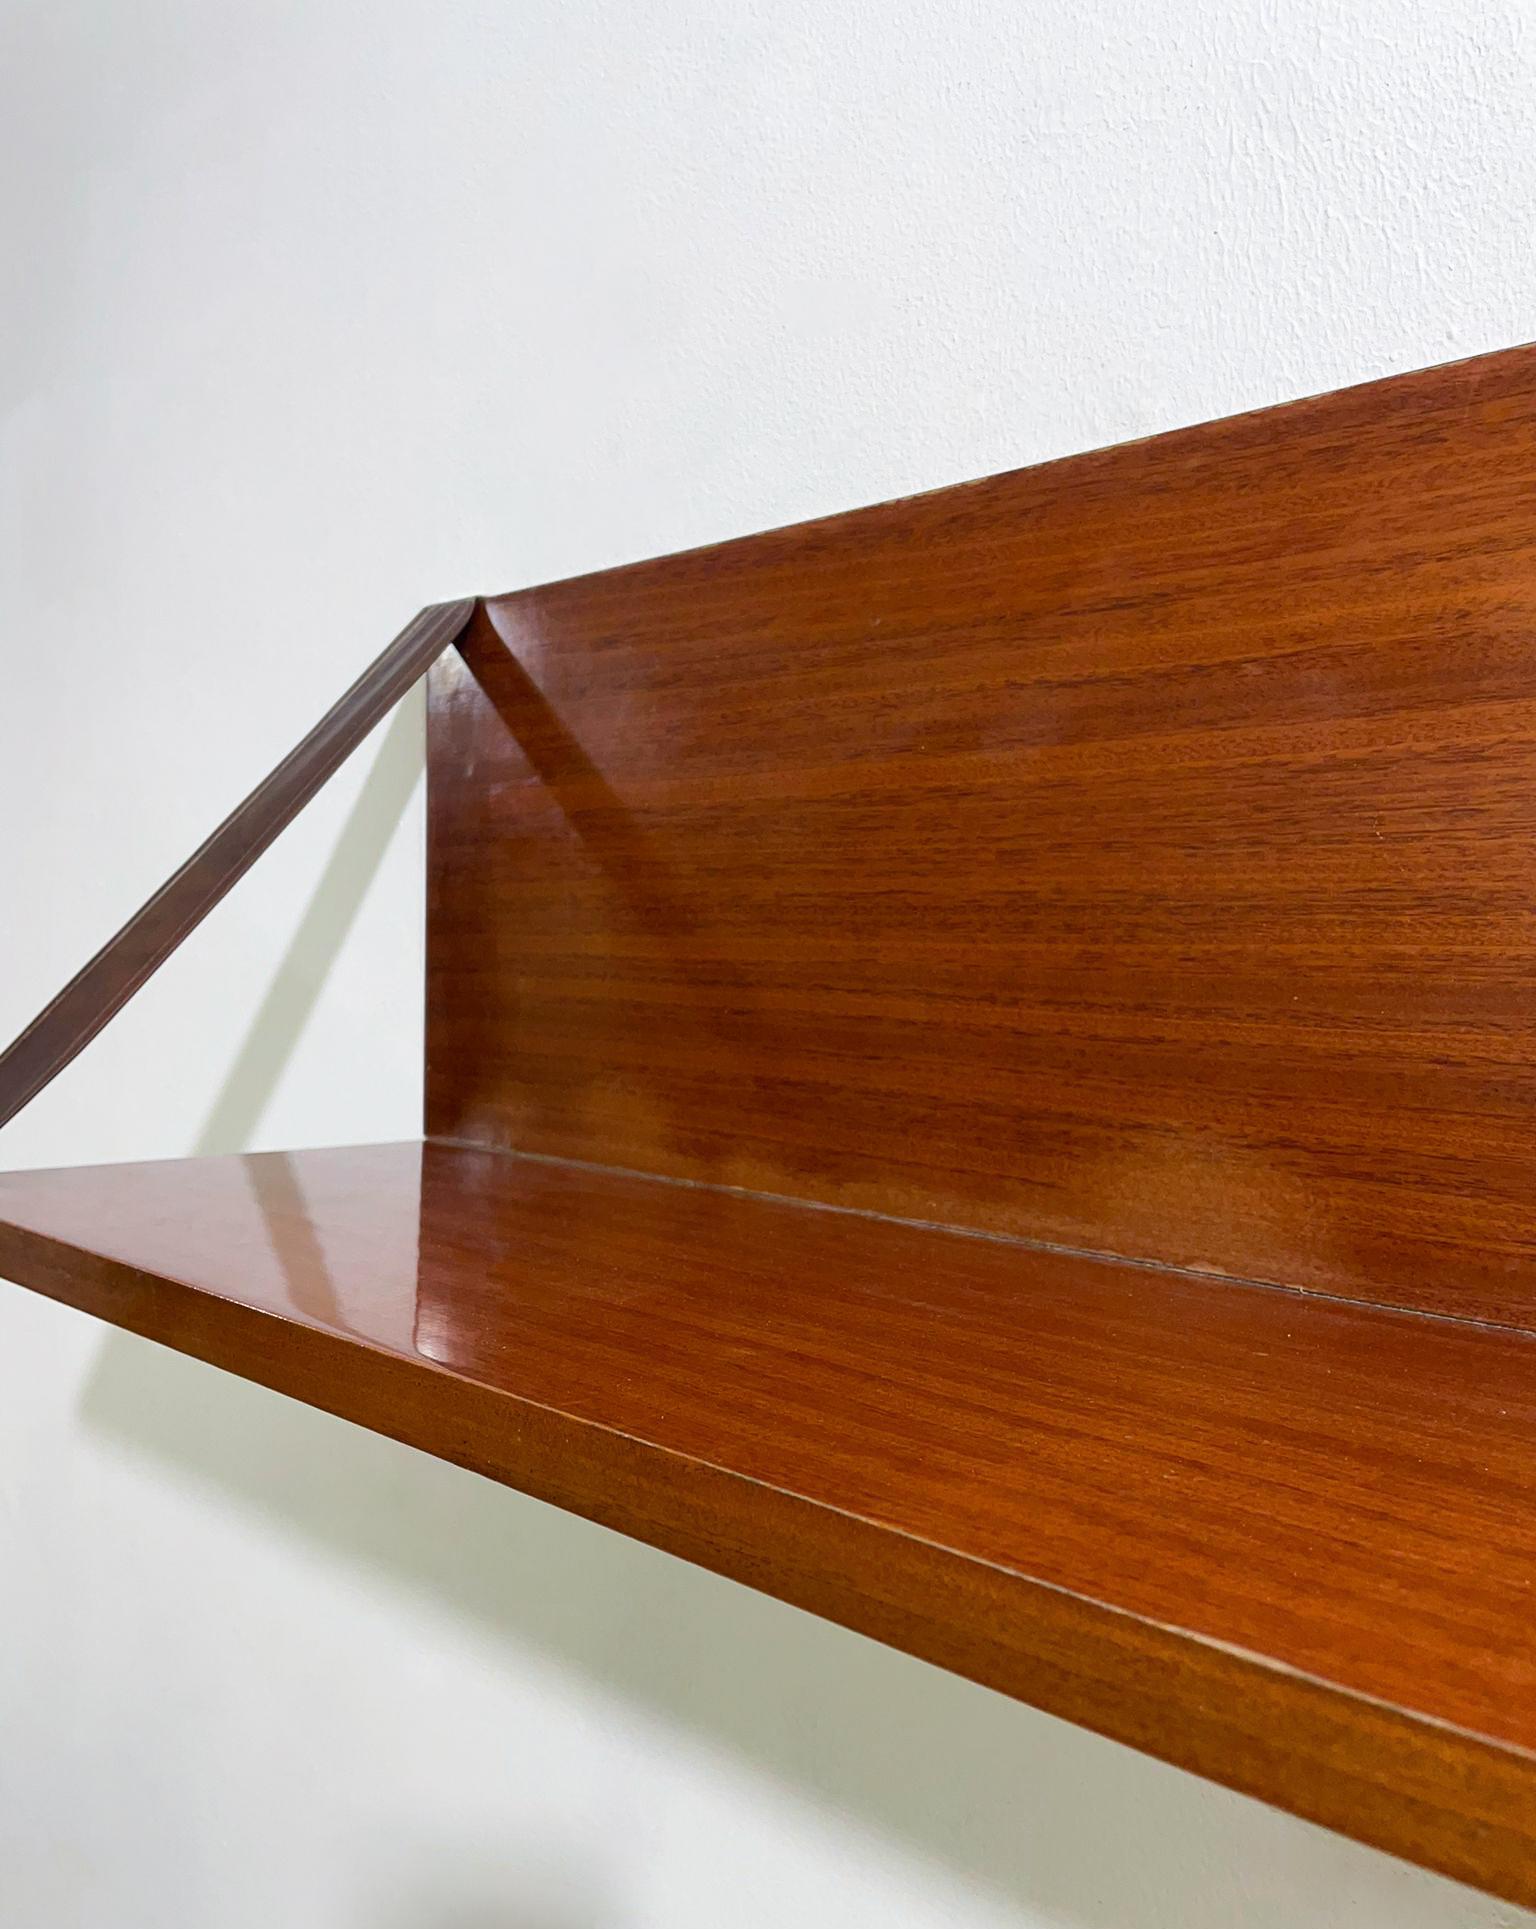 Mid-20th Century Mid-Century Wood, Leather and Brass Shelve, Italy, 1960s - 2 available For Sale